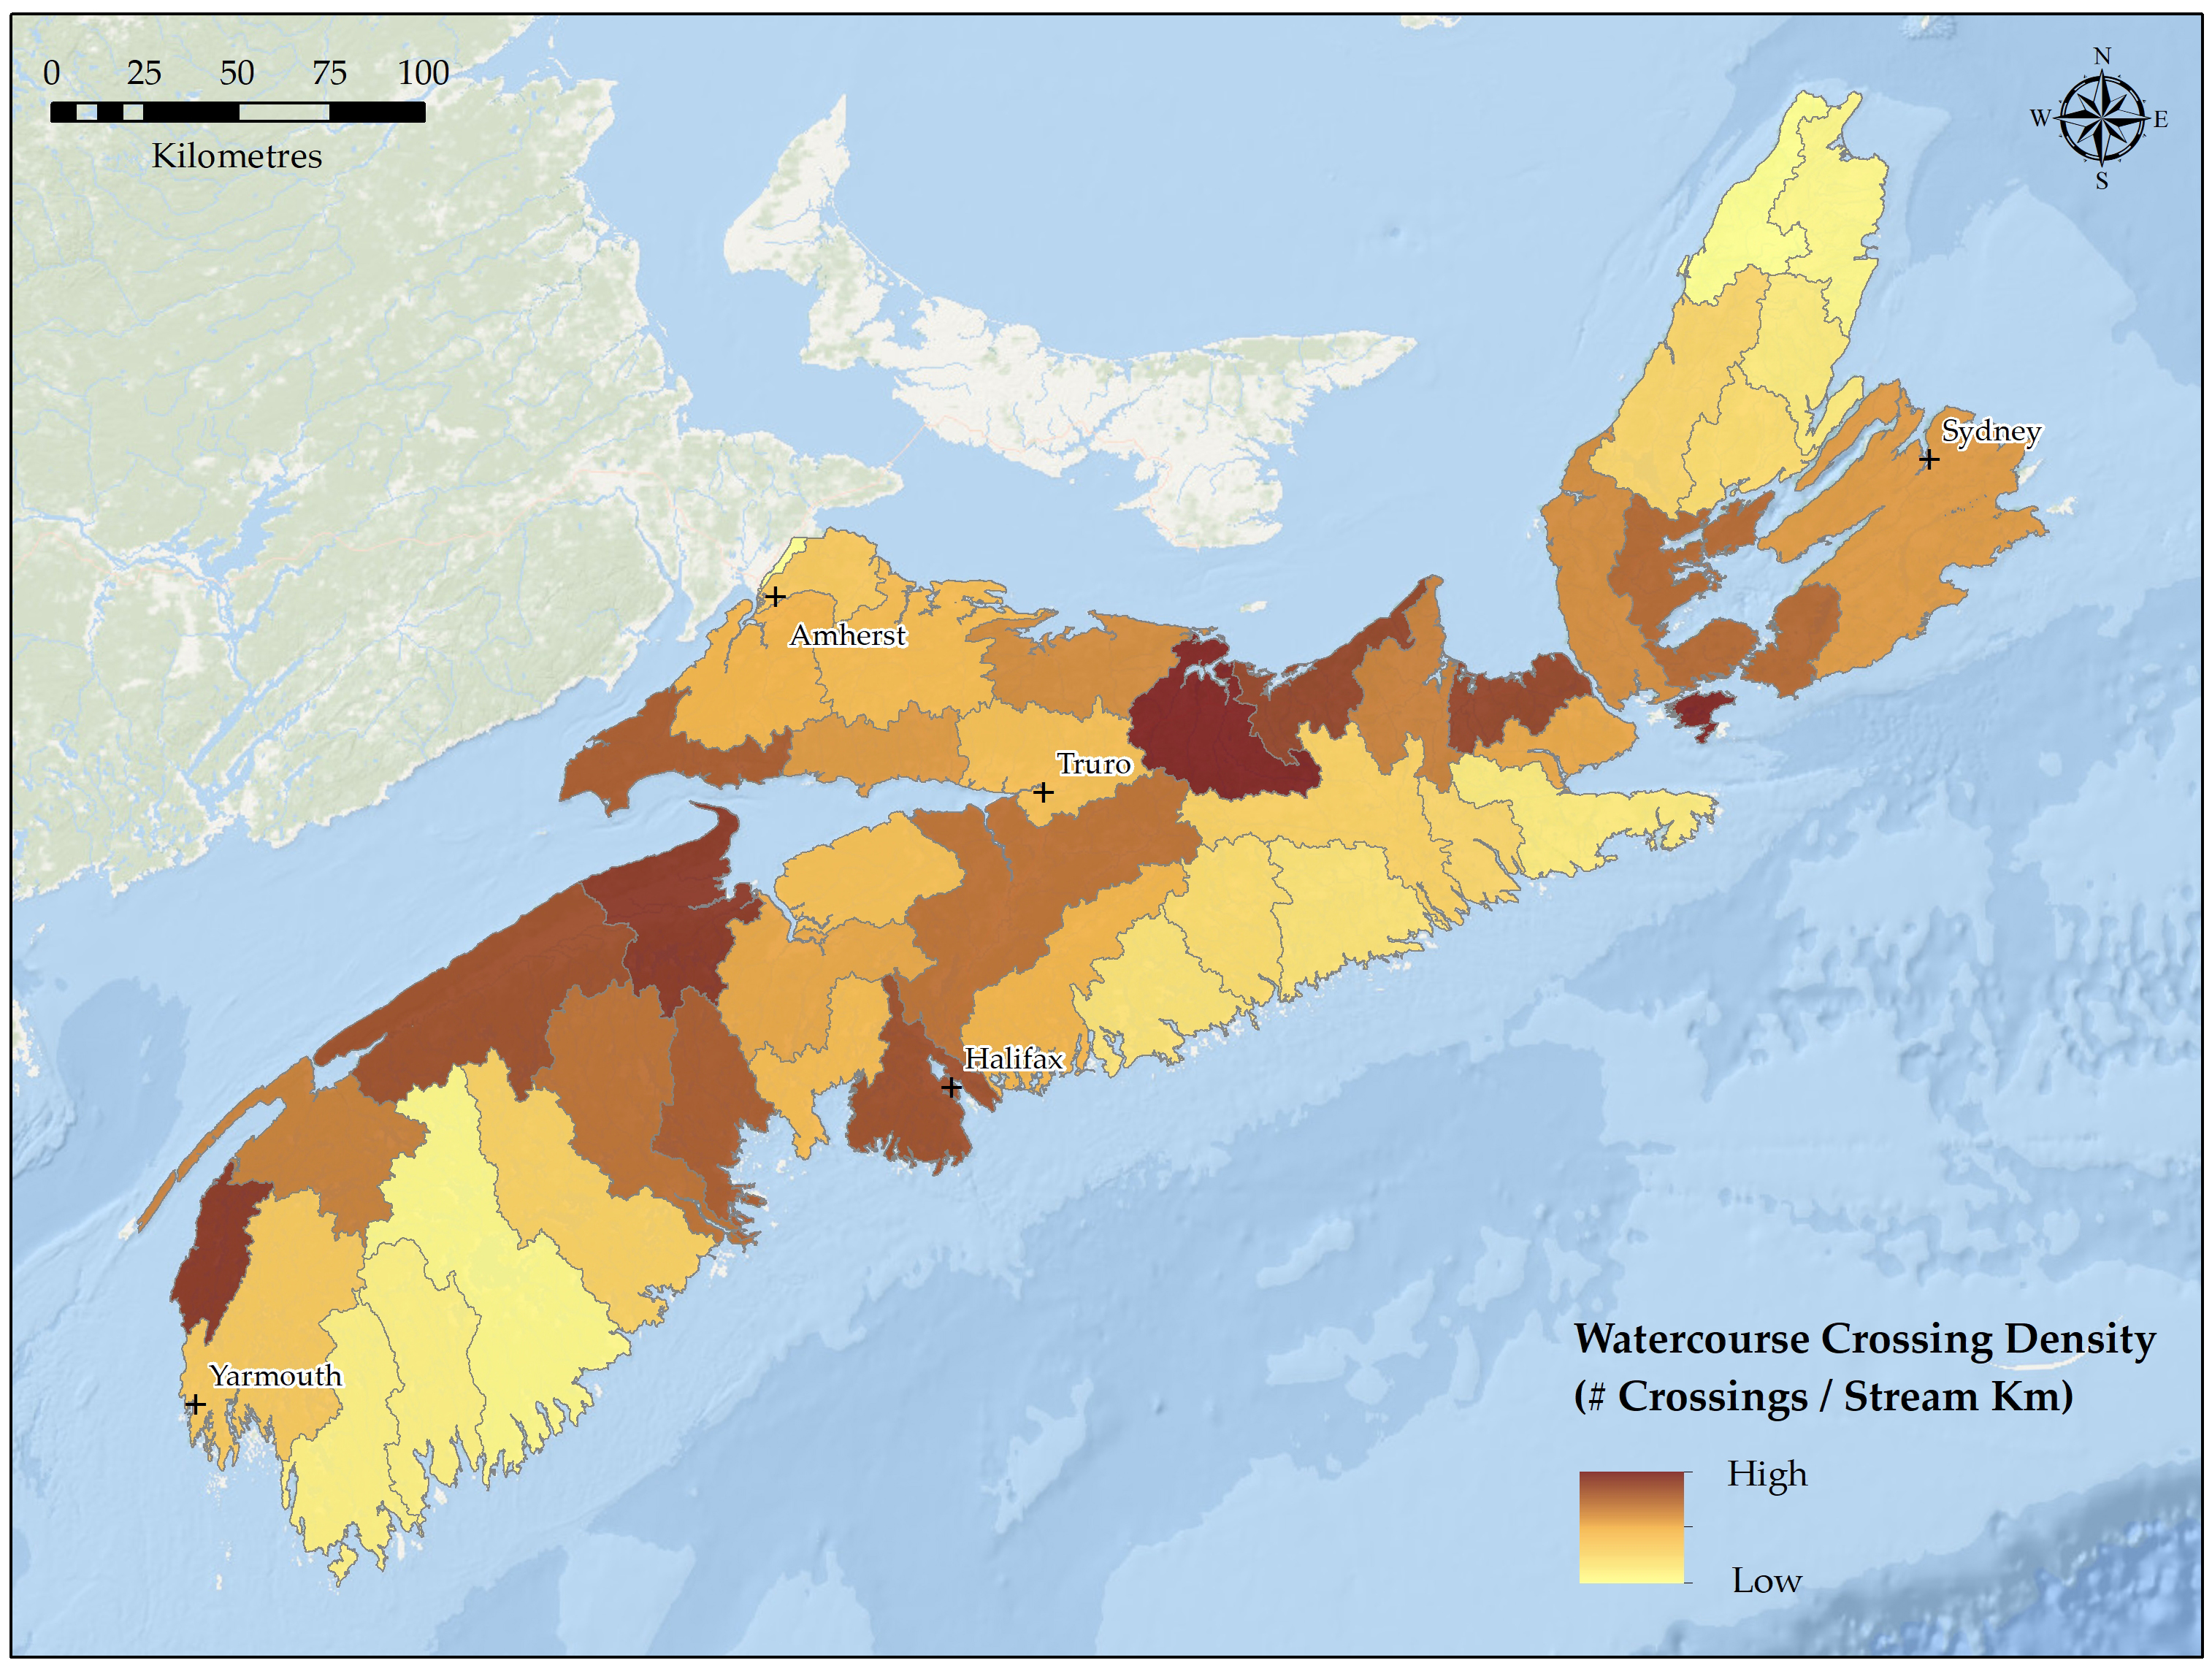 A map of Nova Scotia shows watersheds categorized by watercourse crossing density, or the number of stream crossings divided by the total stream length (km). Text version below.